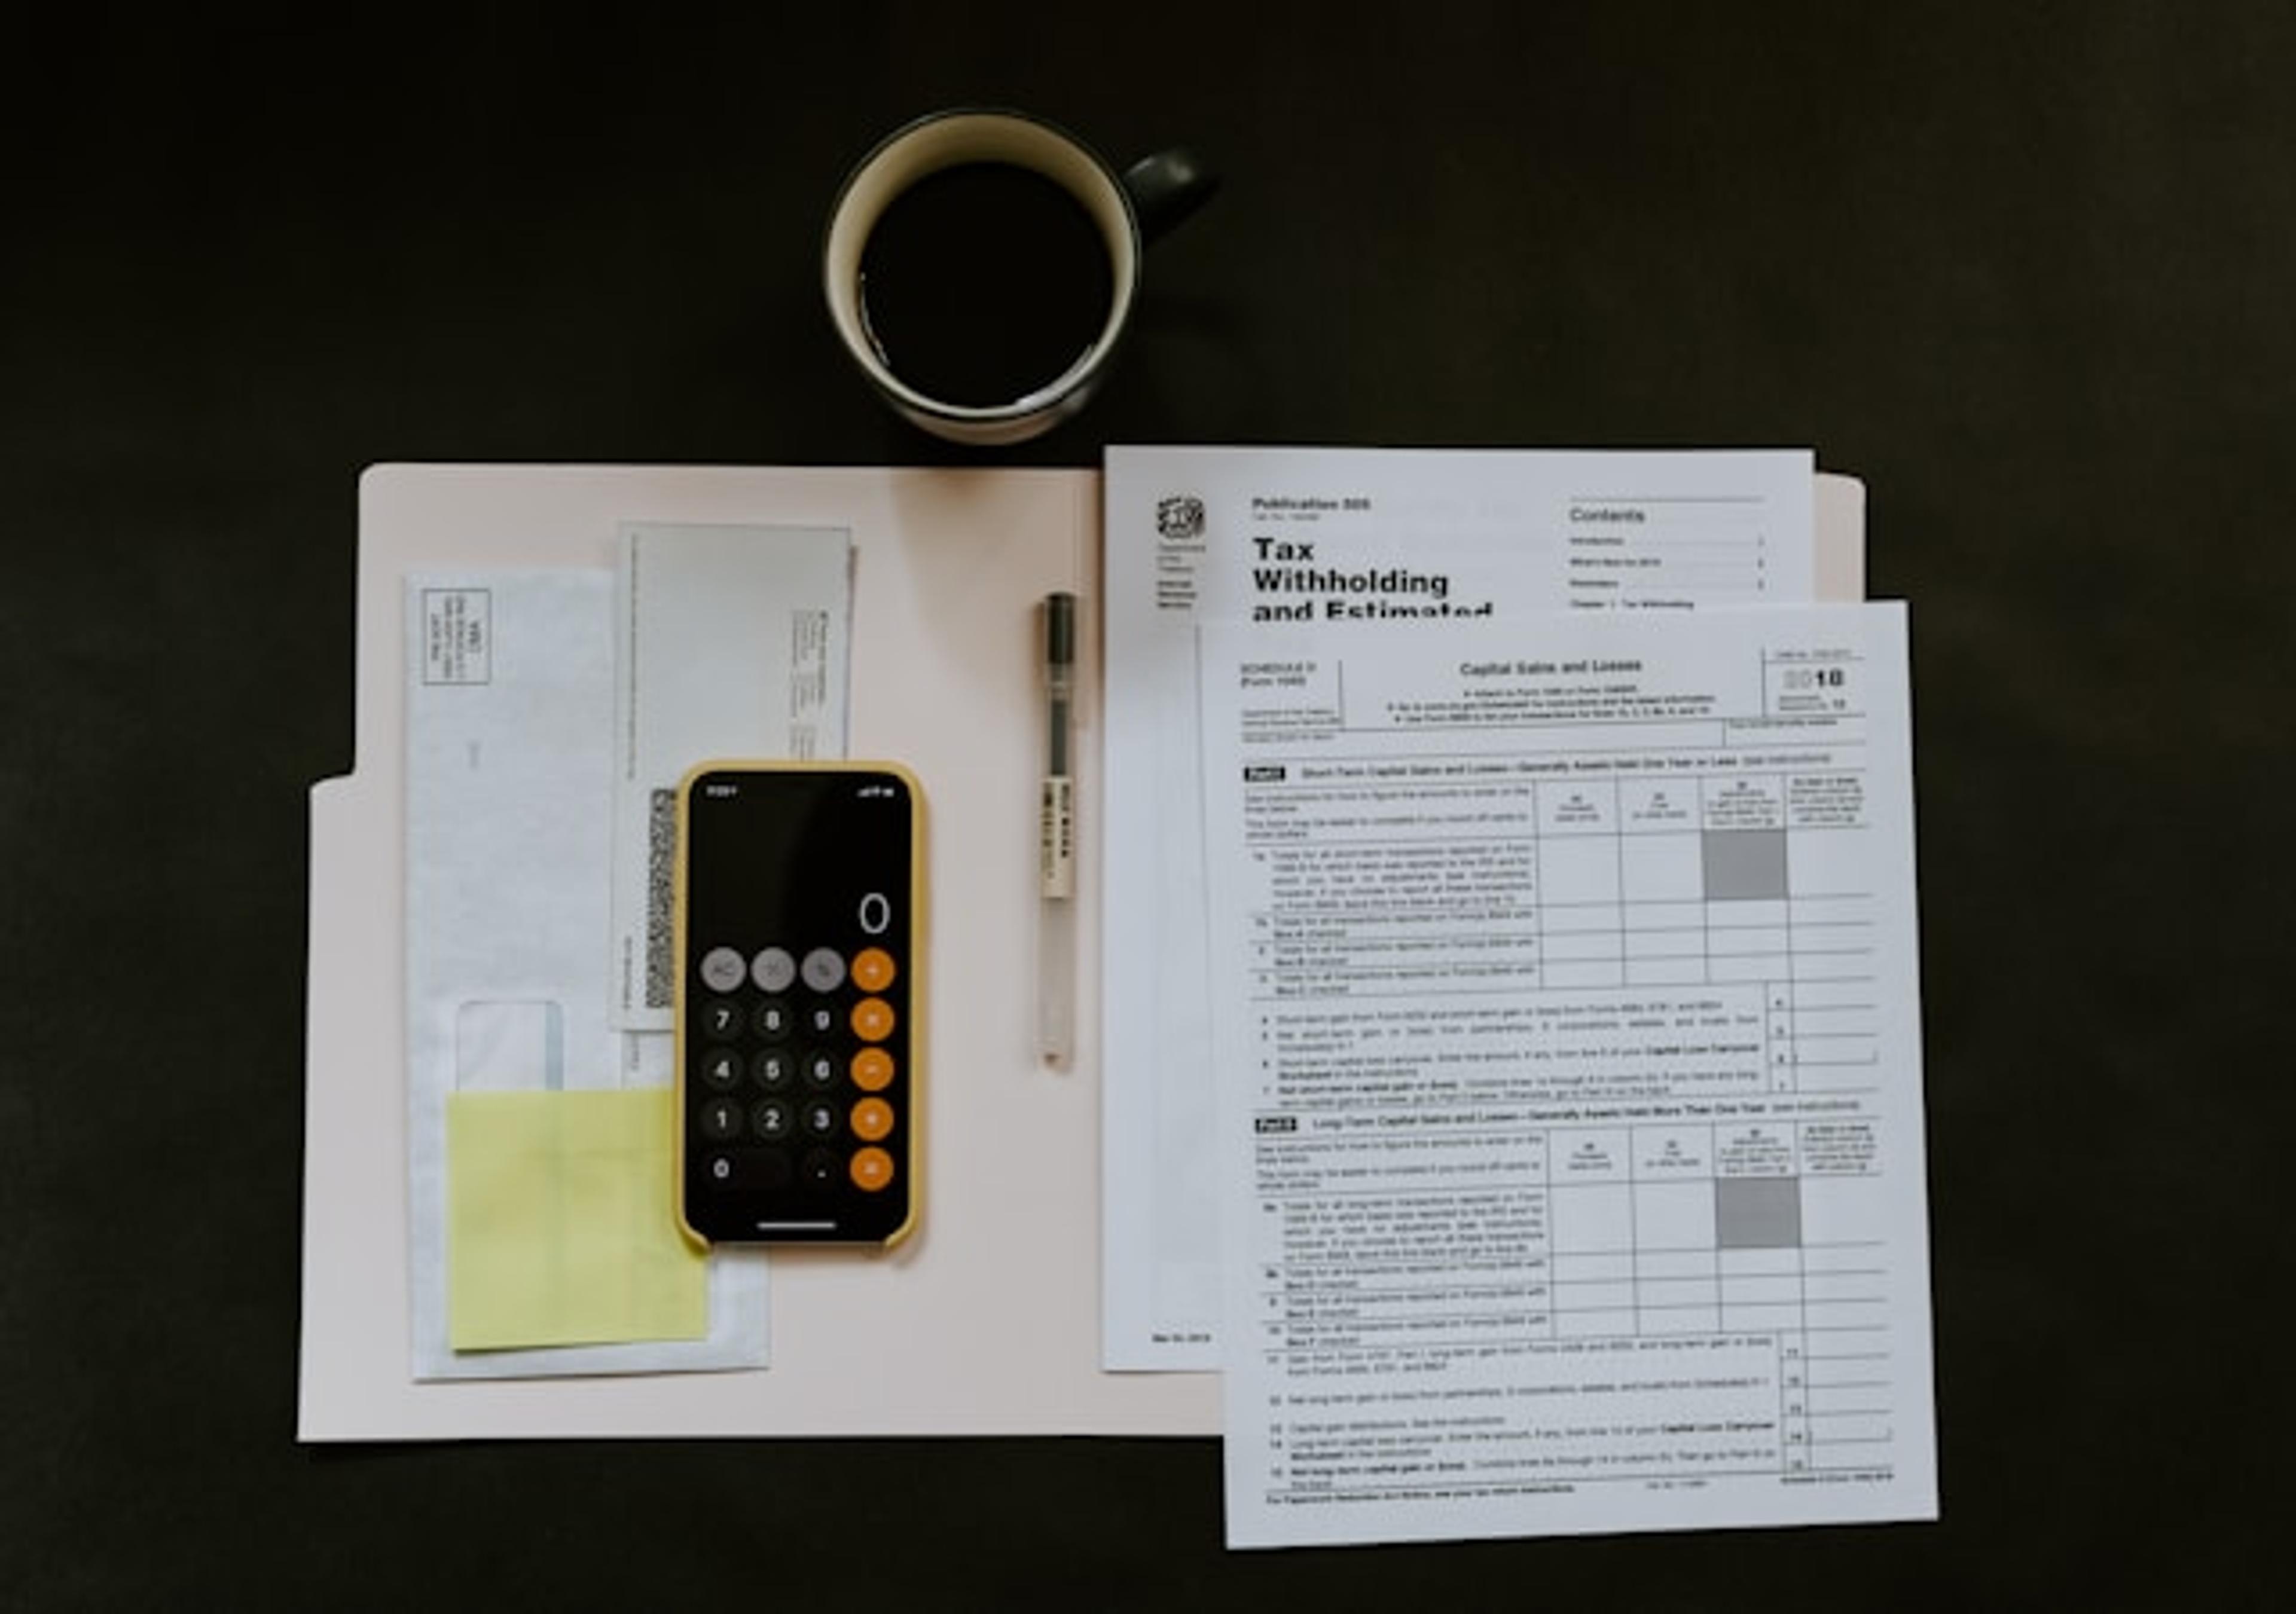 A table with coffee, a smartphone with calculator view open, and some papers featuring tax filing documents.